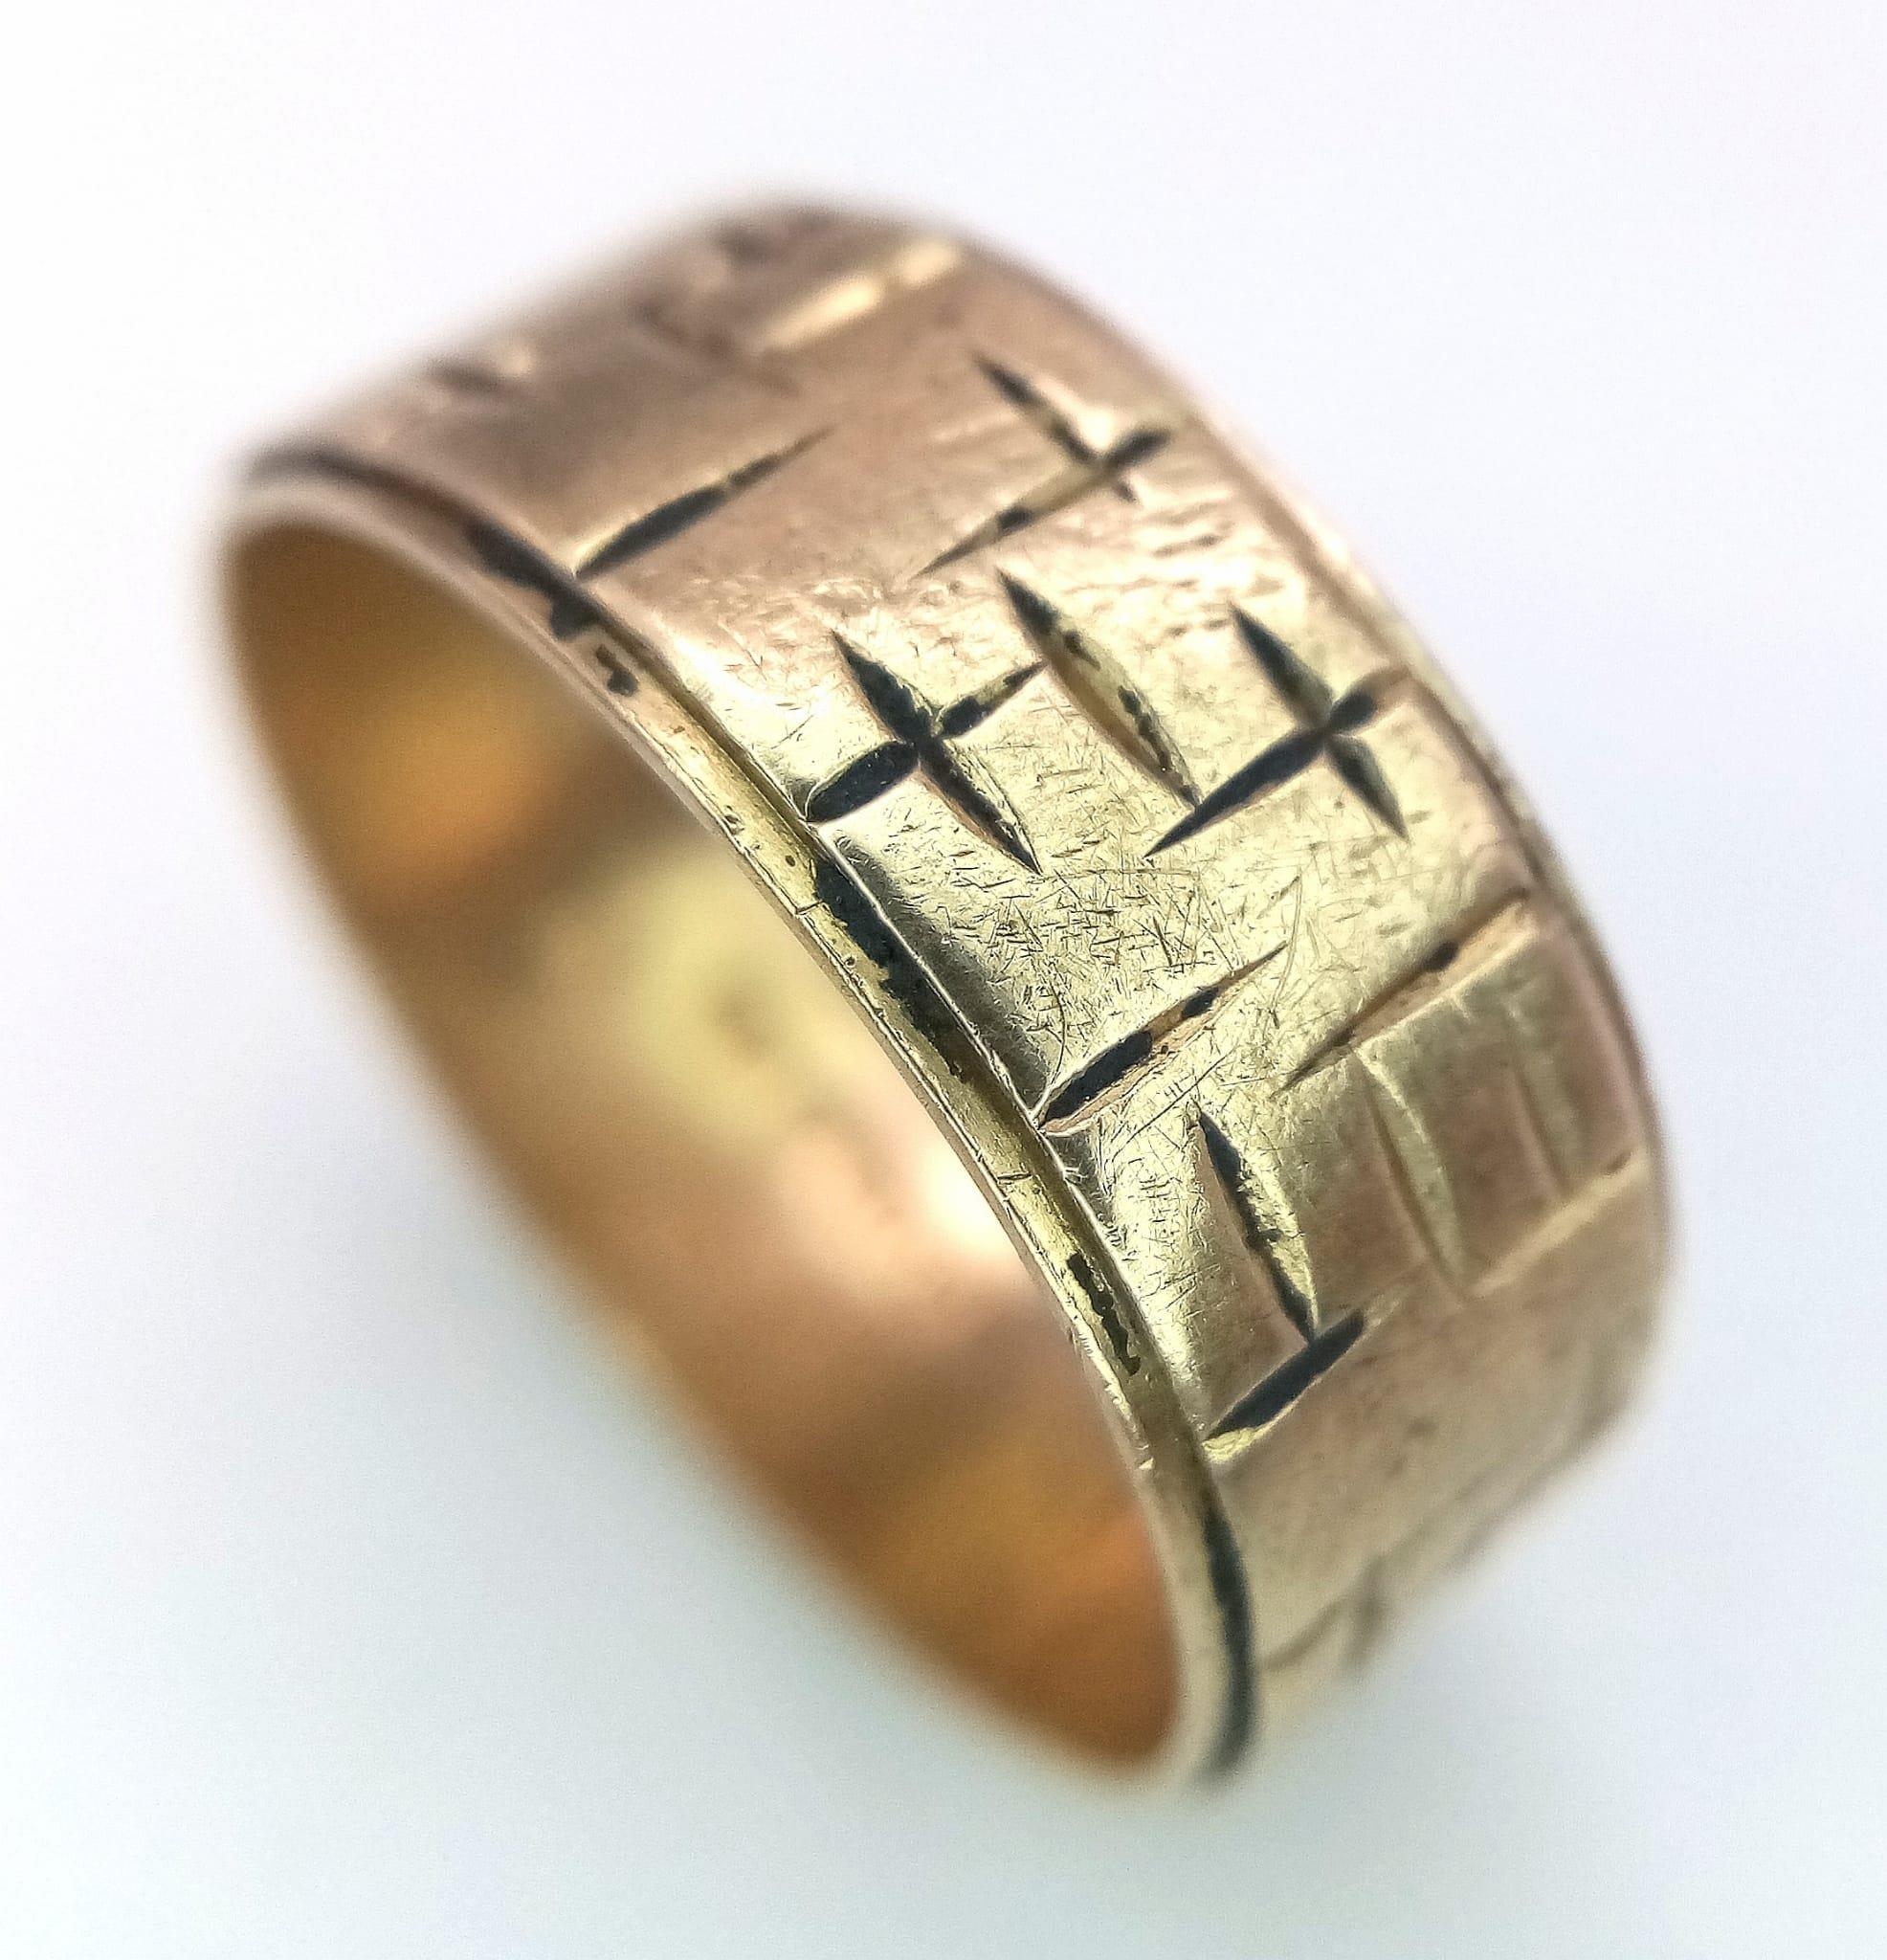 A Vintage 9K Yellow Gold Band Ring. Geometric decoration. 7mm width. Size O. 4.3g weight. - Image 2 of 5